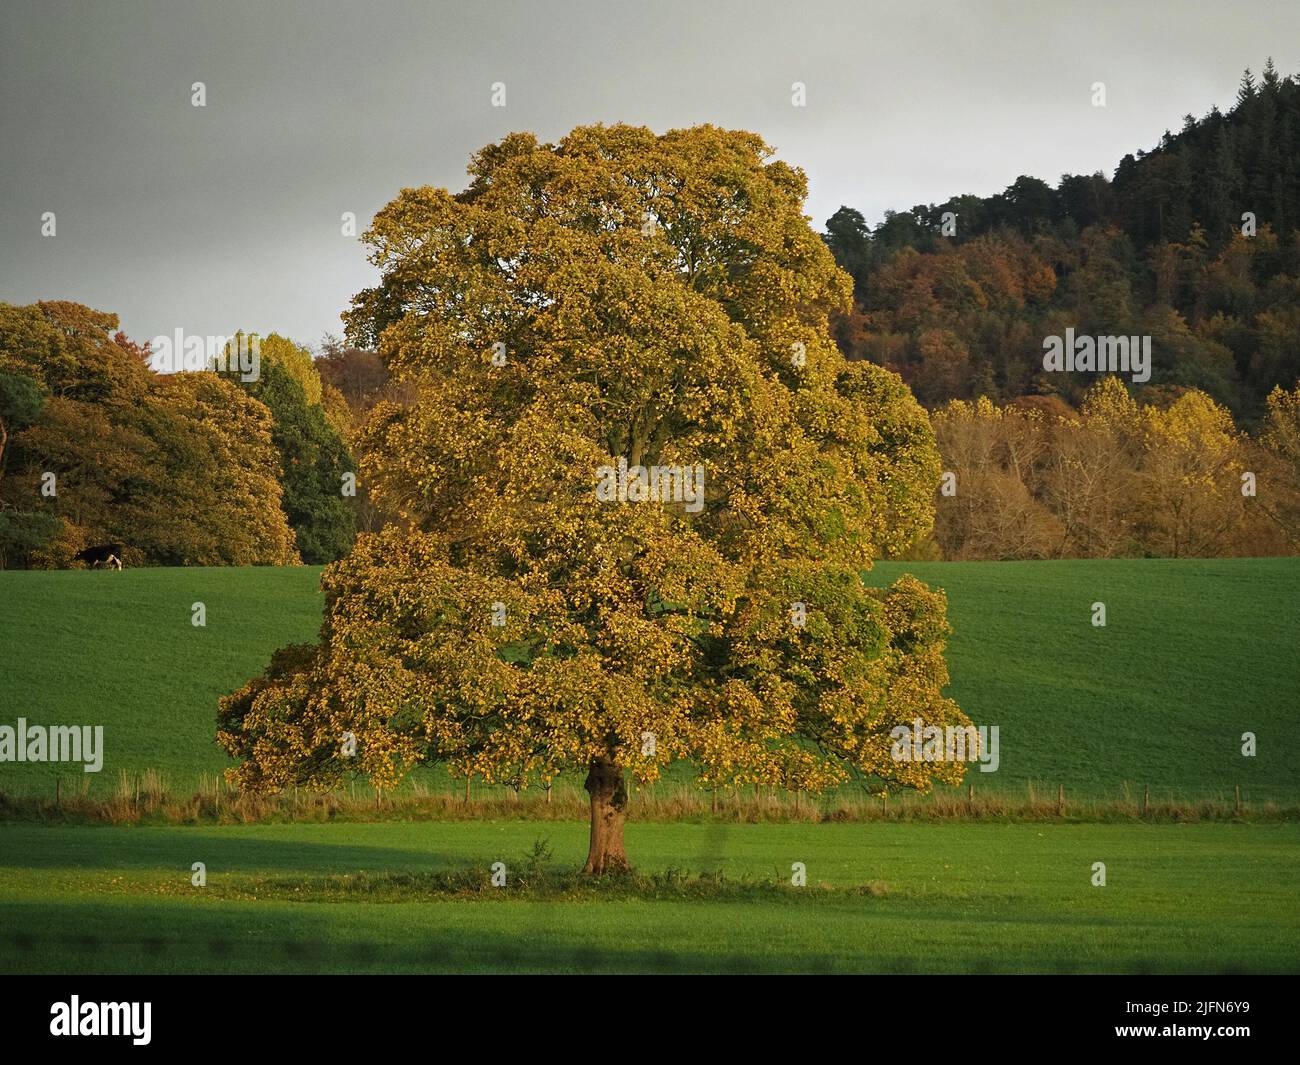 stately Sycamore tree (Acer pseudoplatanus) in evening light towering over bright green sunlit grassy fields with cow in North Yorkshire, England, UK Stock Photo